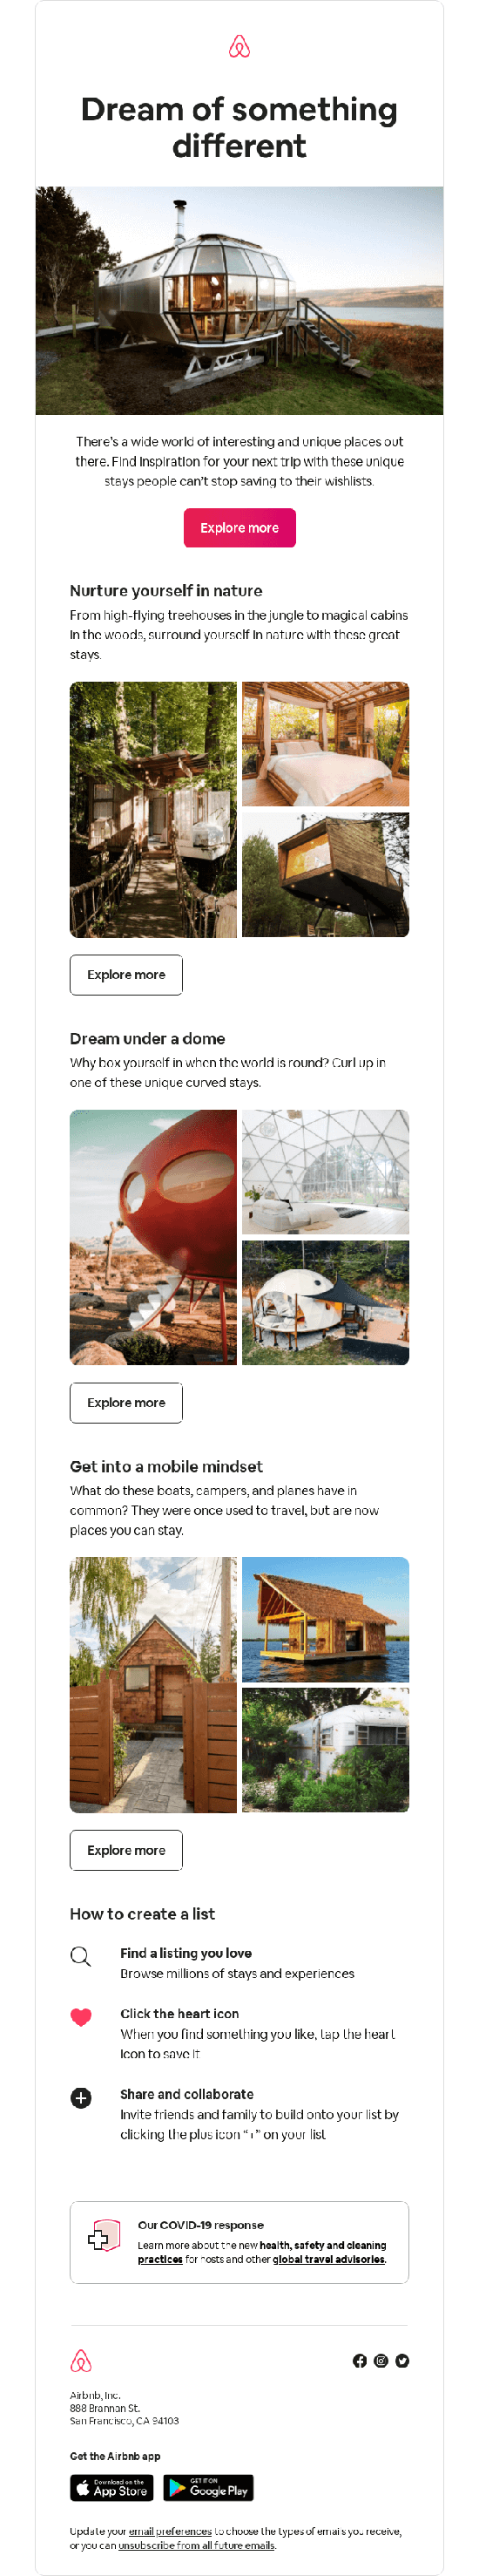 AirBnB dream of something different email campaign